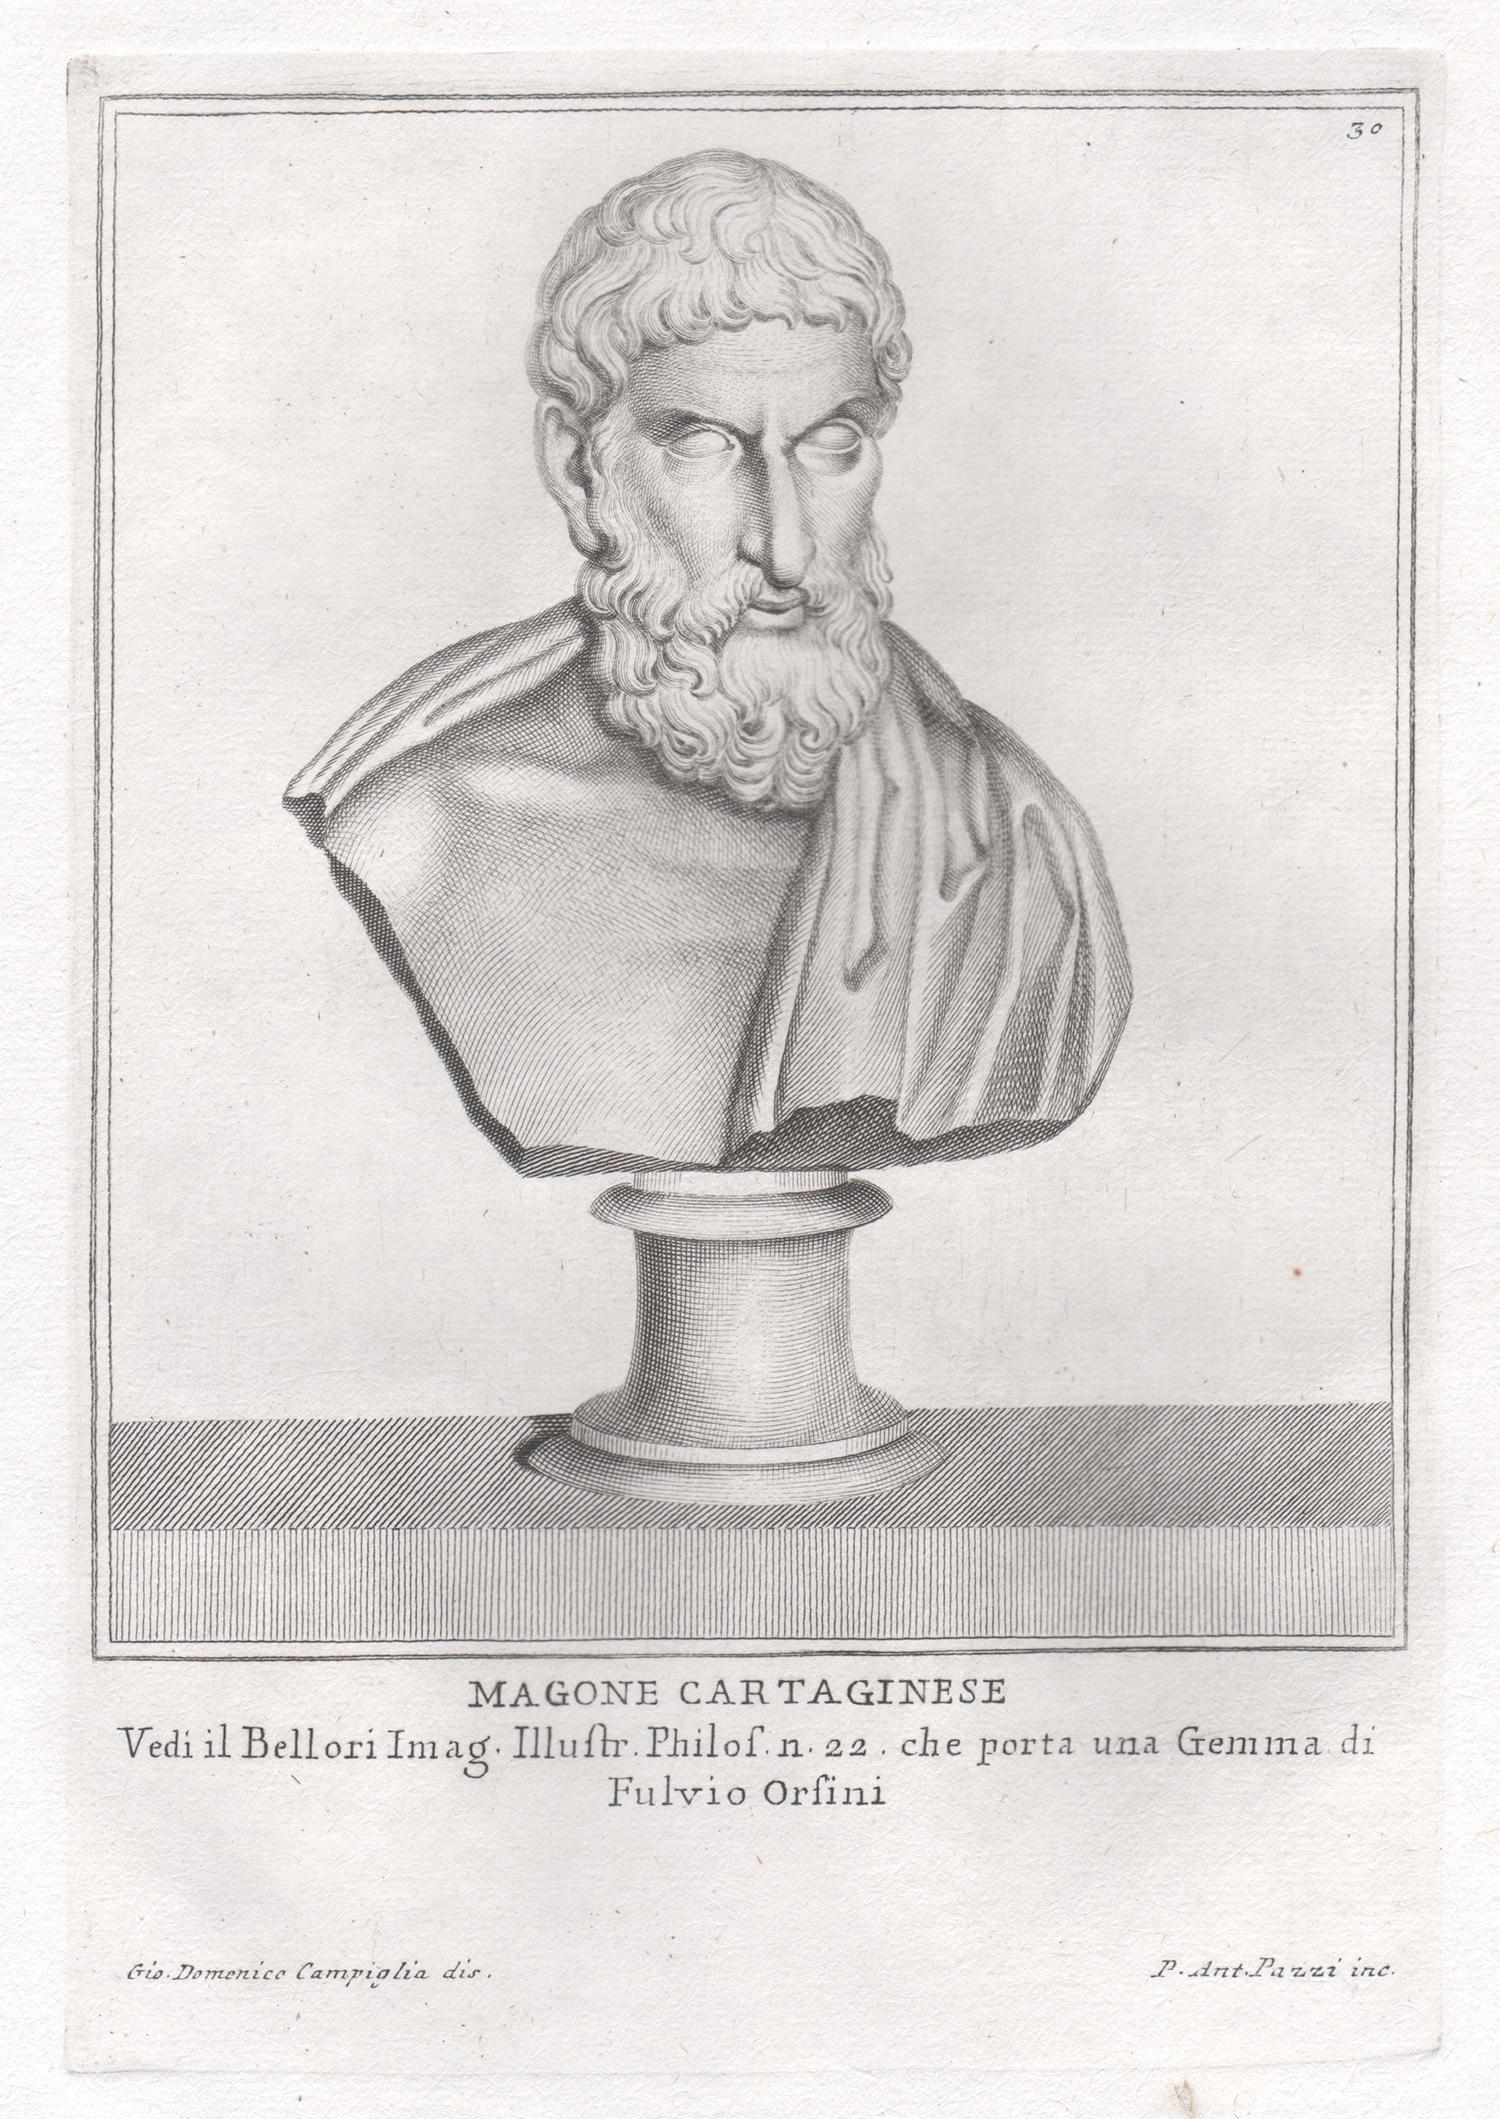 Mago of Carthage, Roman bust, C18th Grand Tour Classical antique engraving print